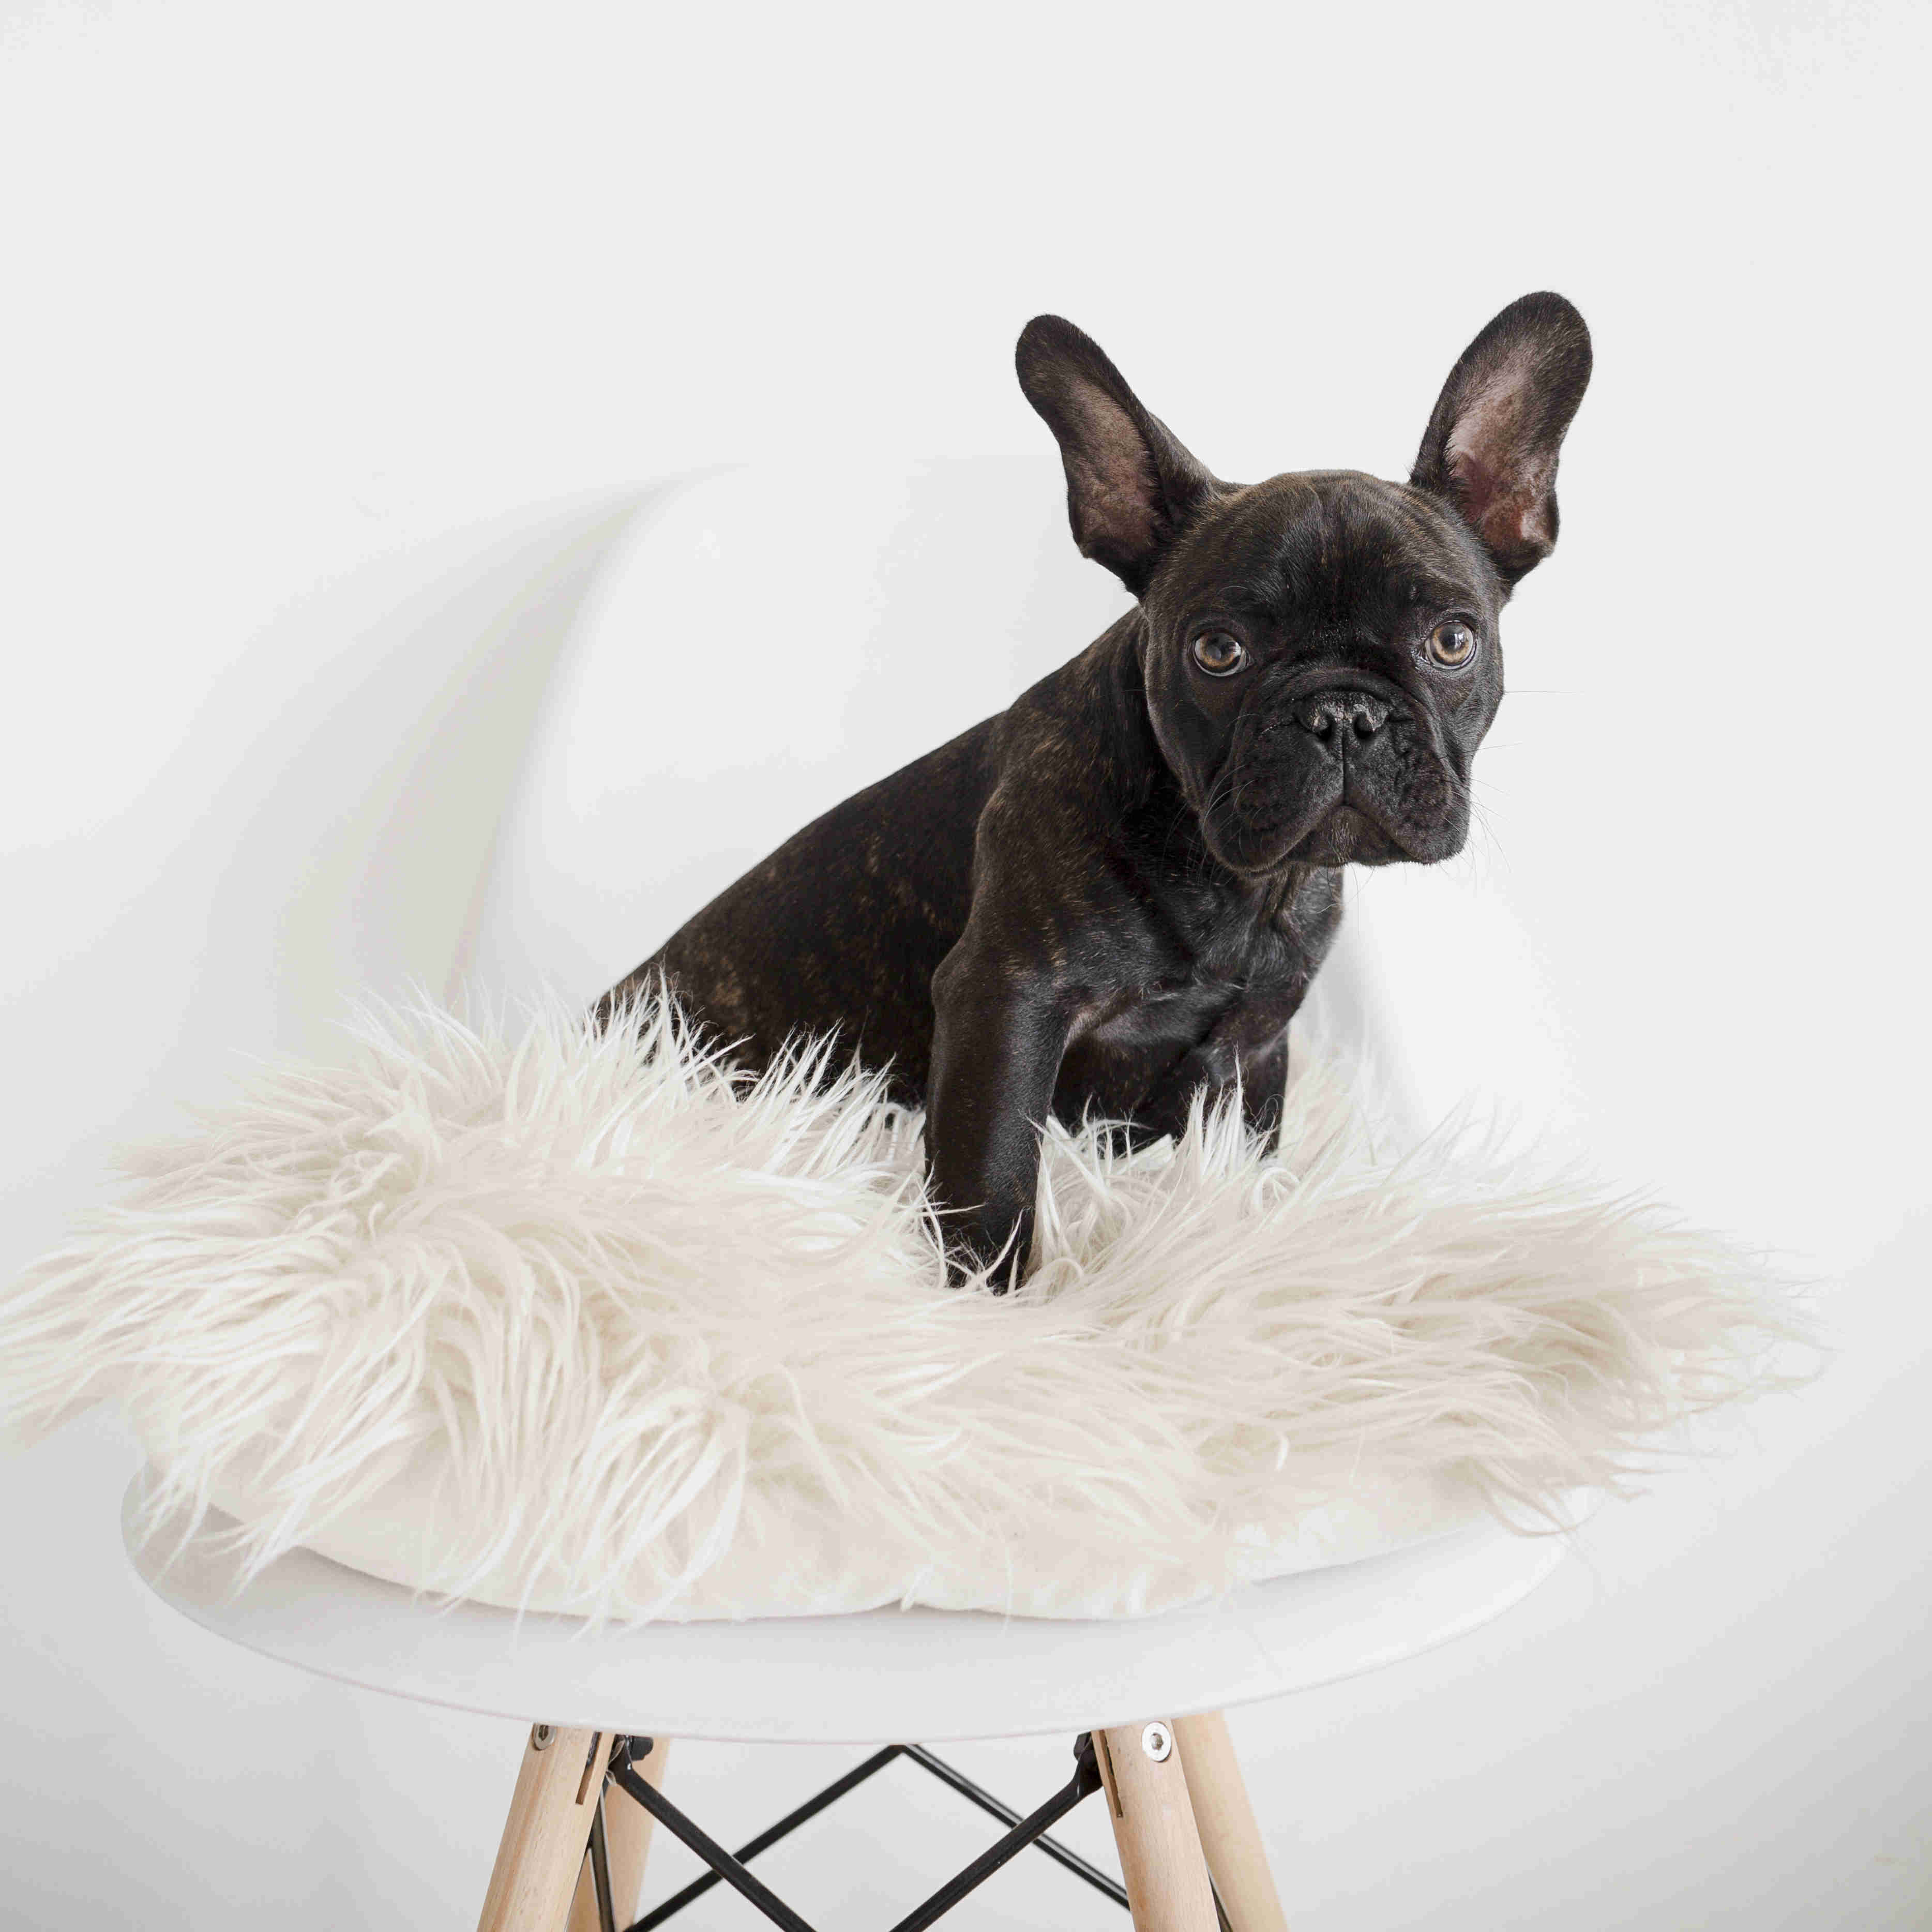 French Bulldog Puppies: Common Health Issues and How to Prevent Them